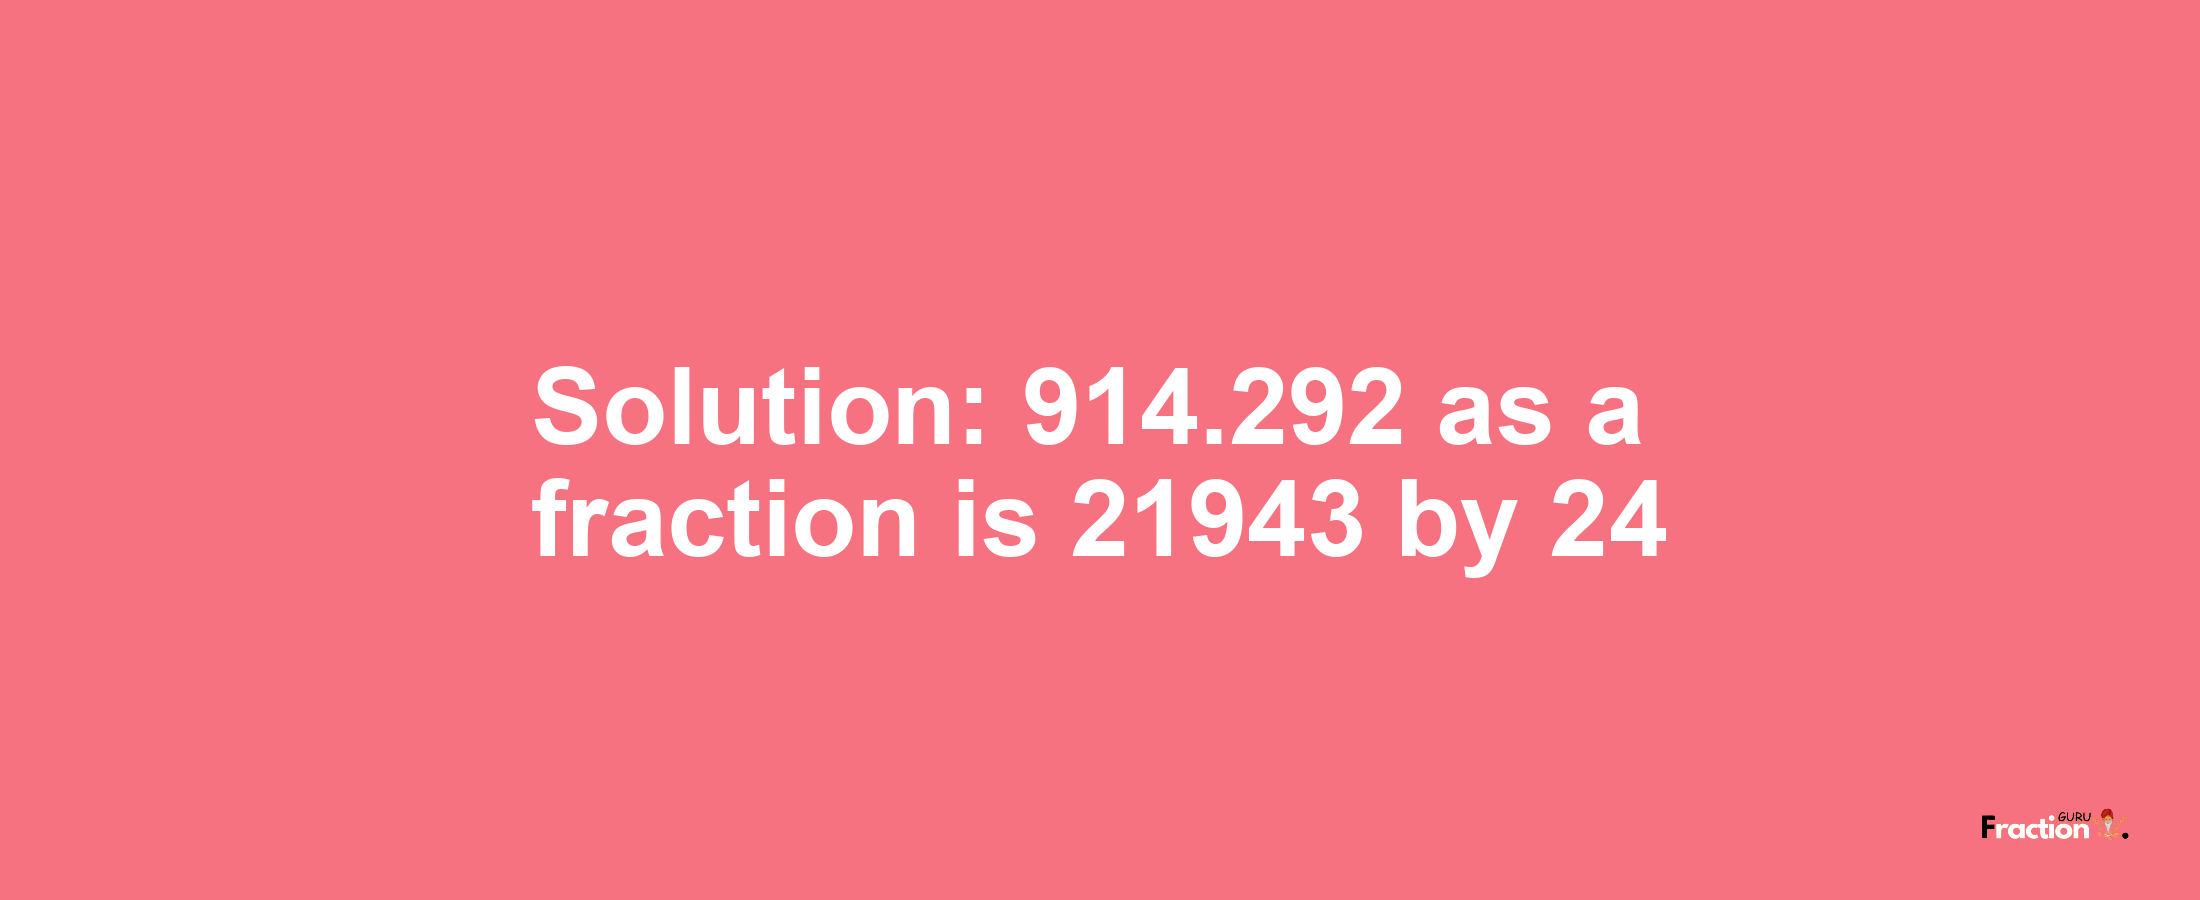 Solution:914.292 as a fraction is 21943/24